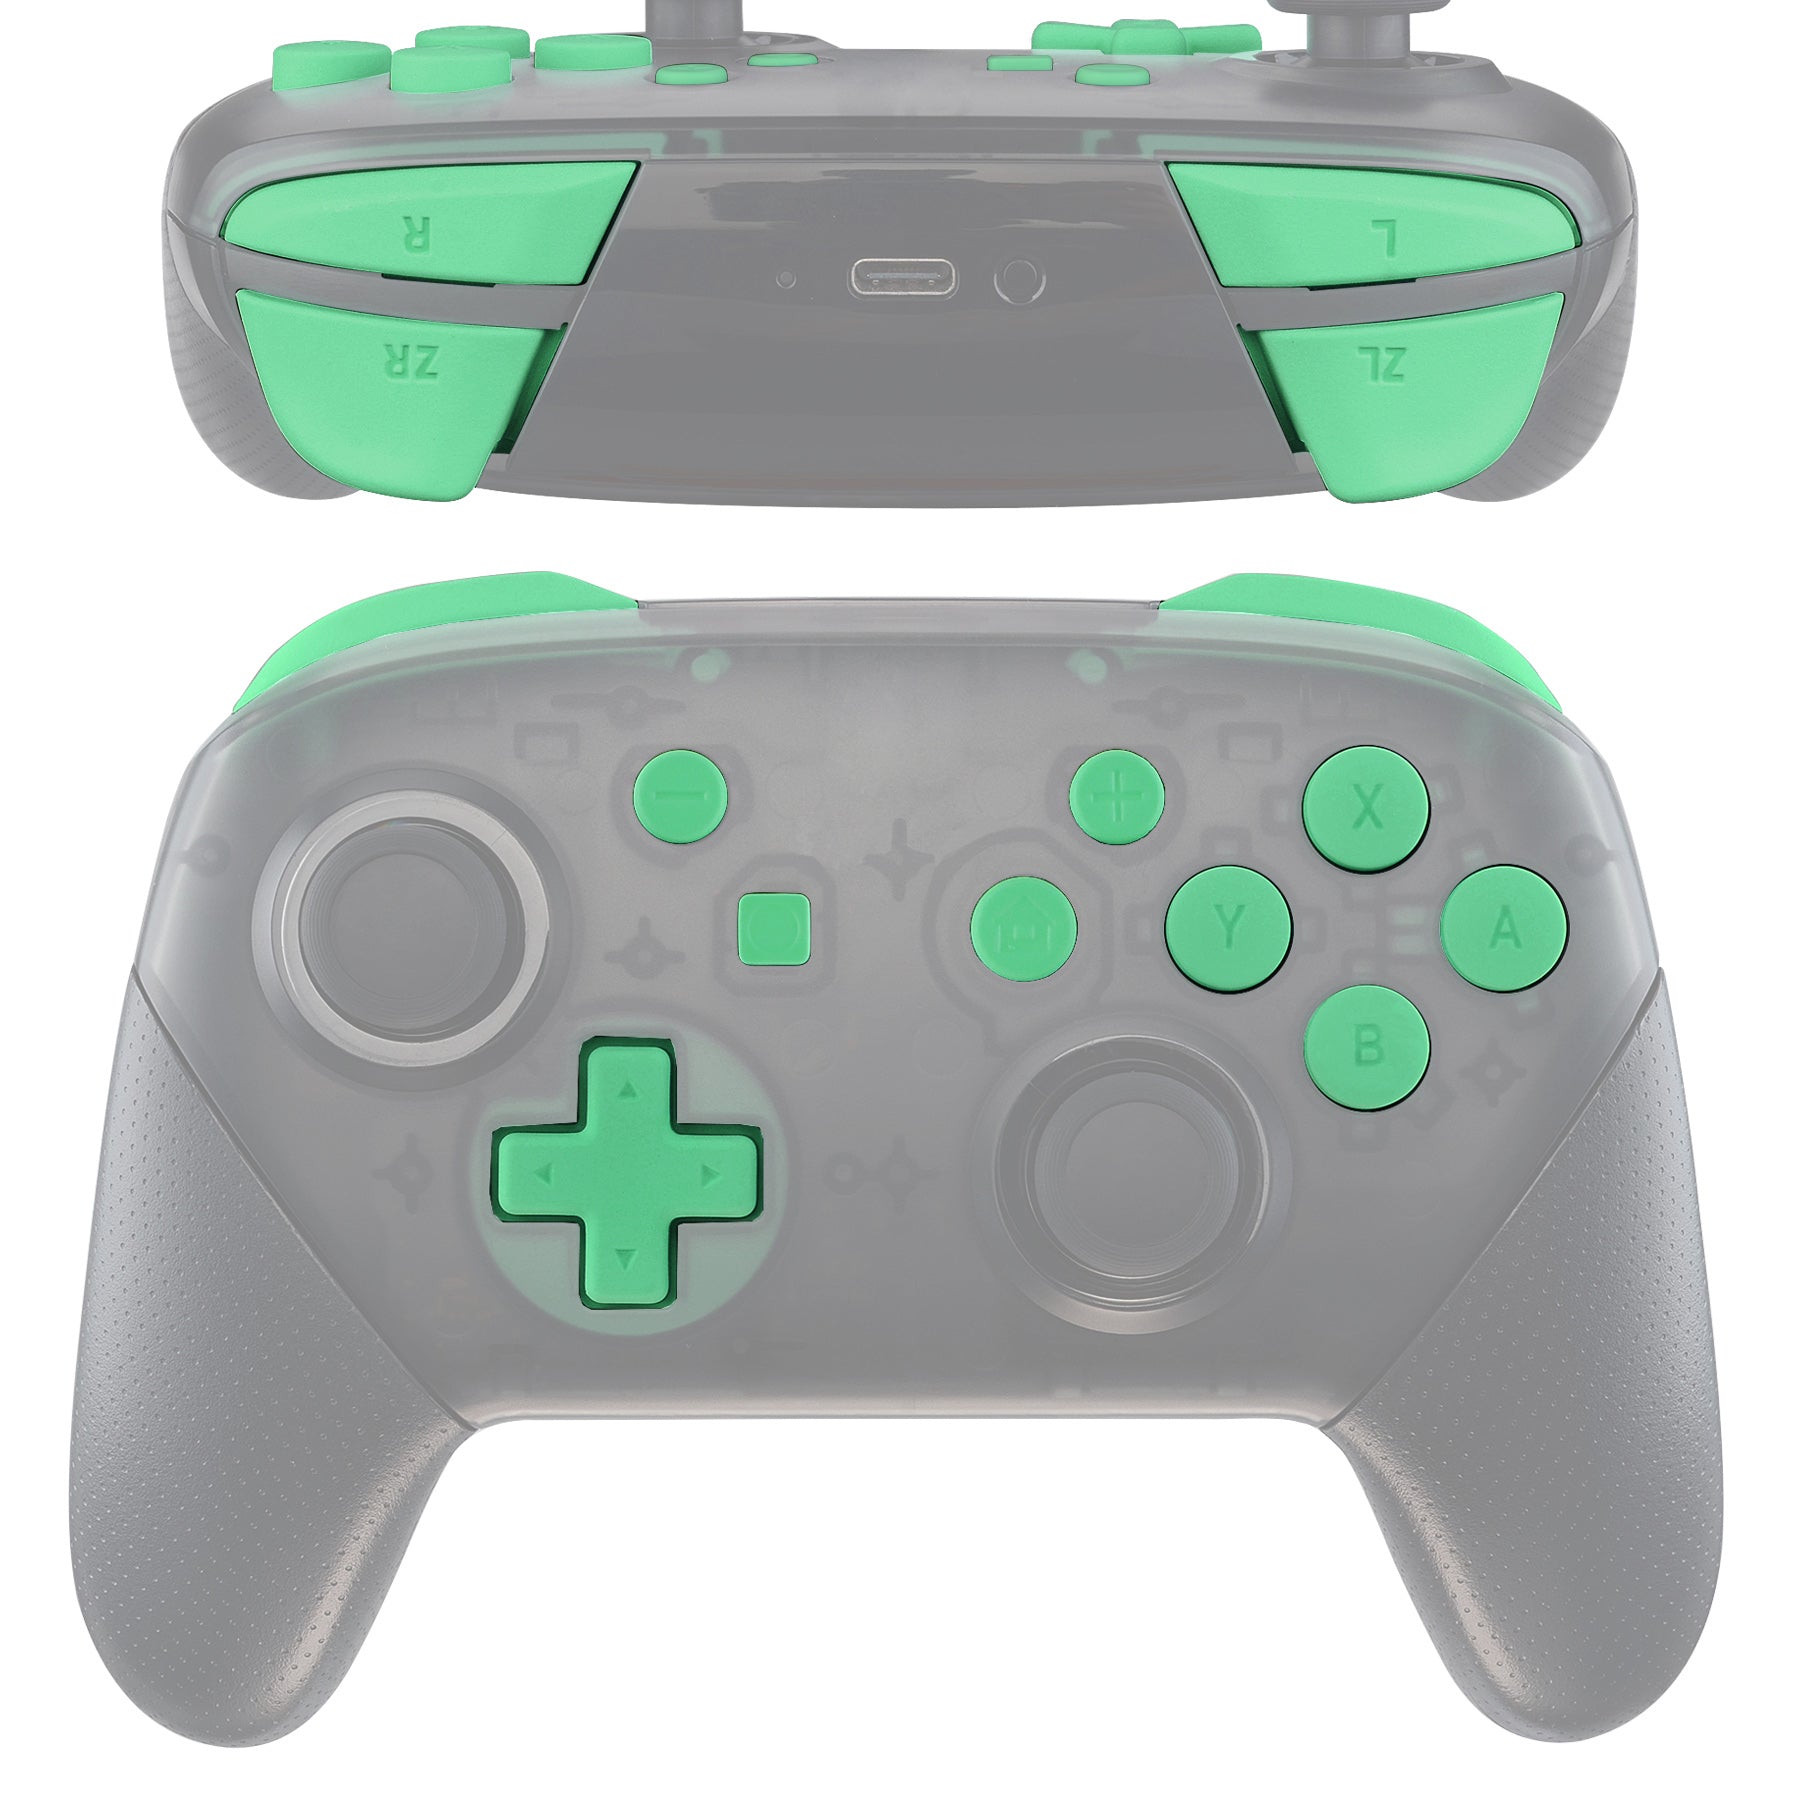 eXtremeRate Retail Mint Green Repair ABXY D-pad ZR ZL L R Keys for Nintendo Switch Pro Controller, DIY Replacement Full Set Buttons with Tools for Nintendo Switch Pro - Controller NOT Included - KRP309